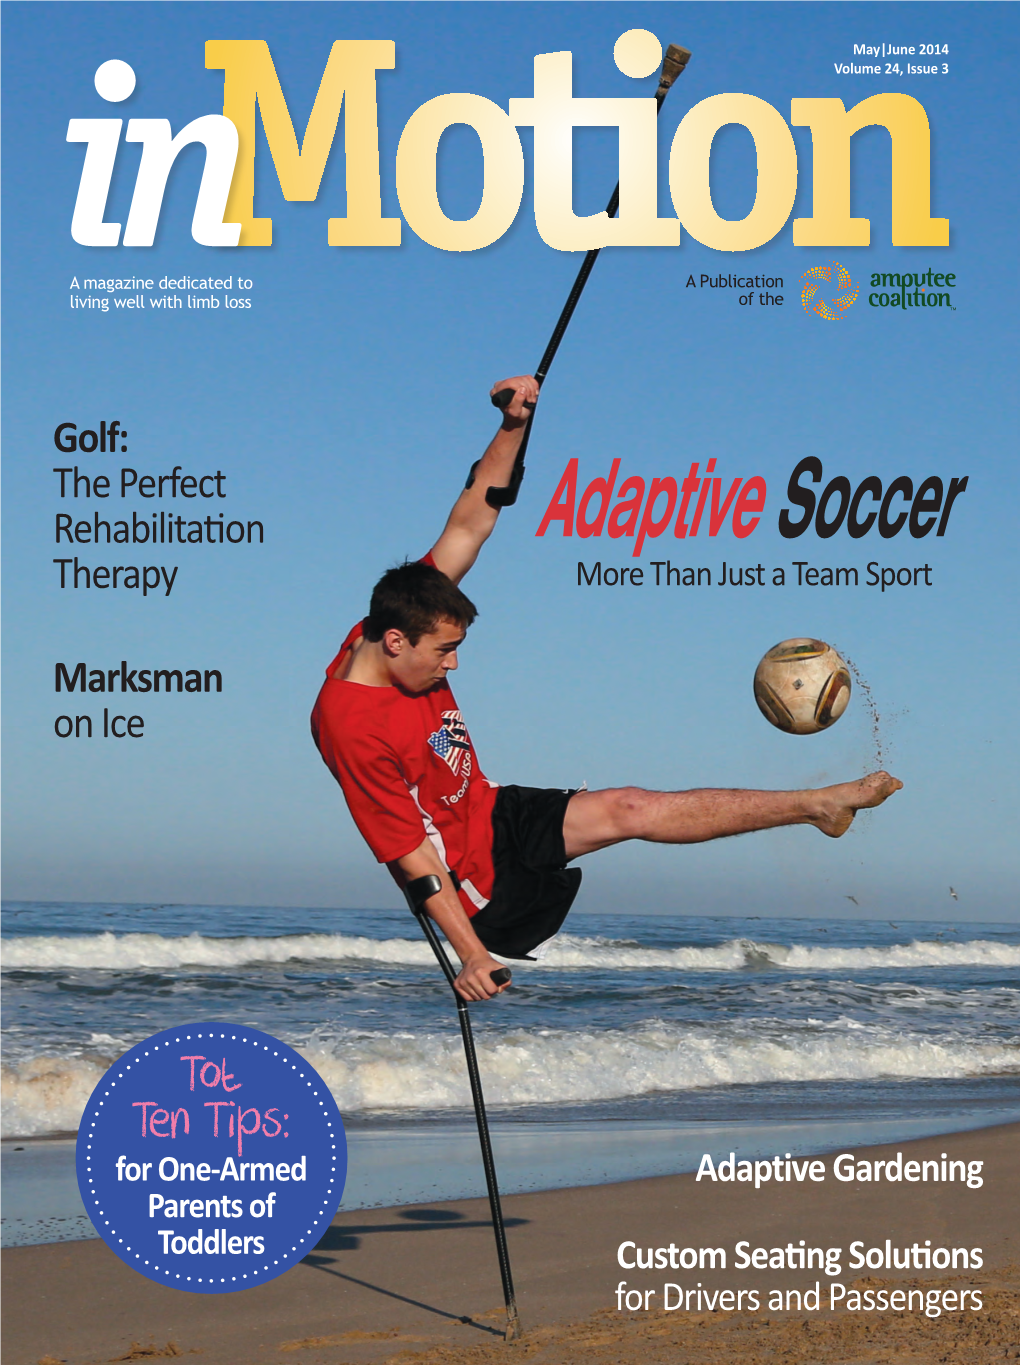 Adaptive Soccer Therapy More Than Just a Team Sport